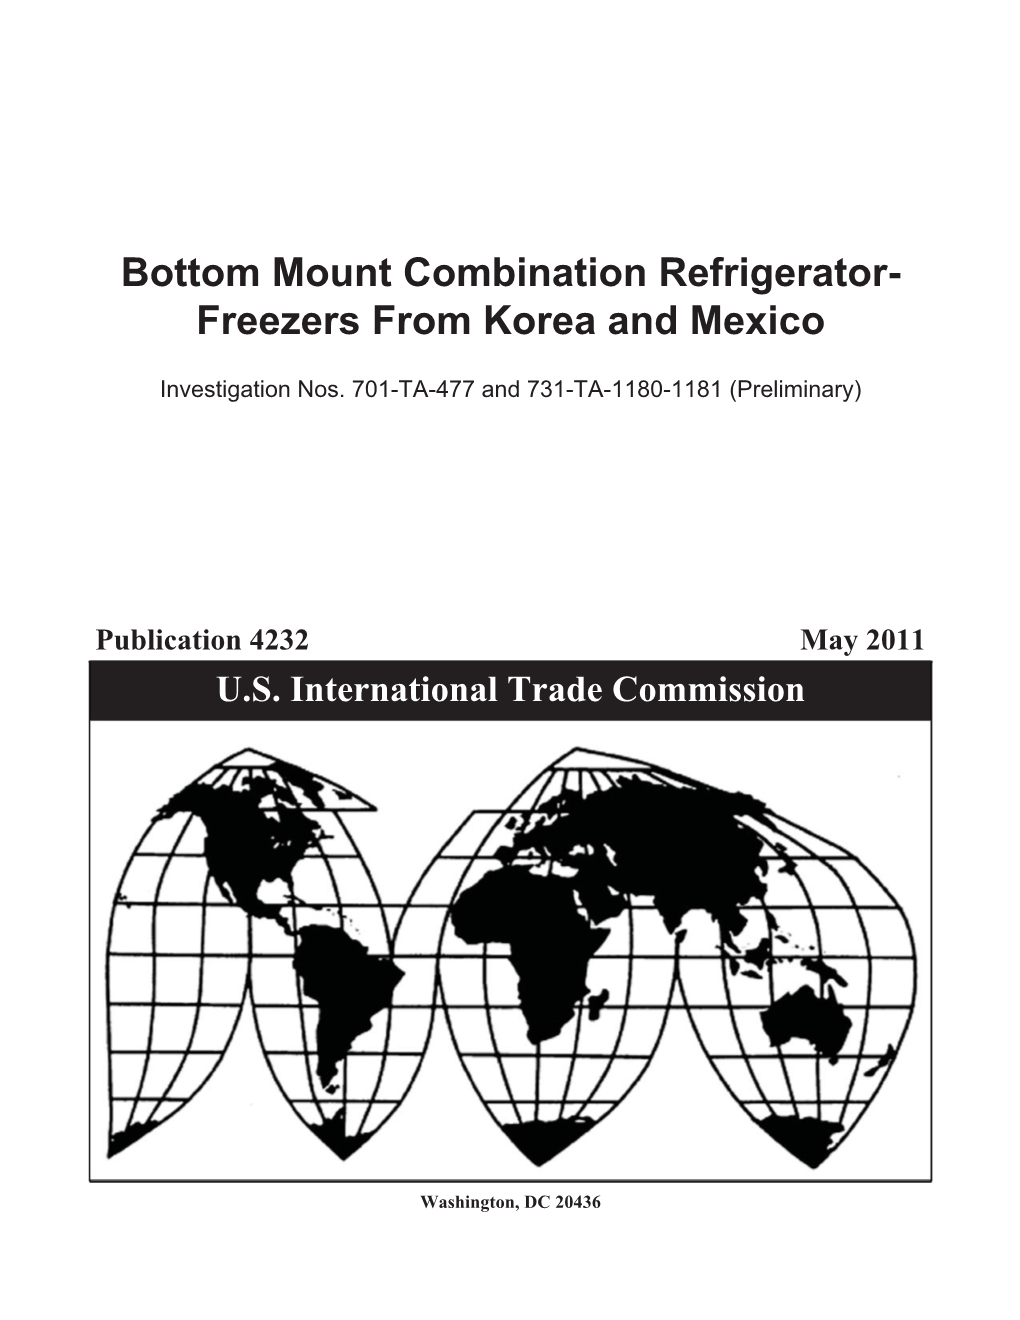 Bottom Mount Combination Refrigerator- Freezers from Korea and Mexico